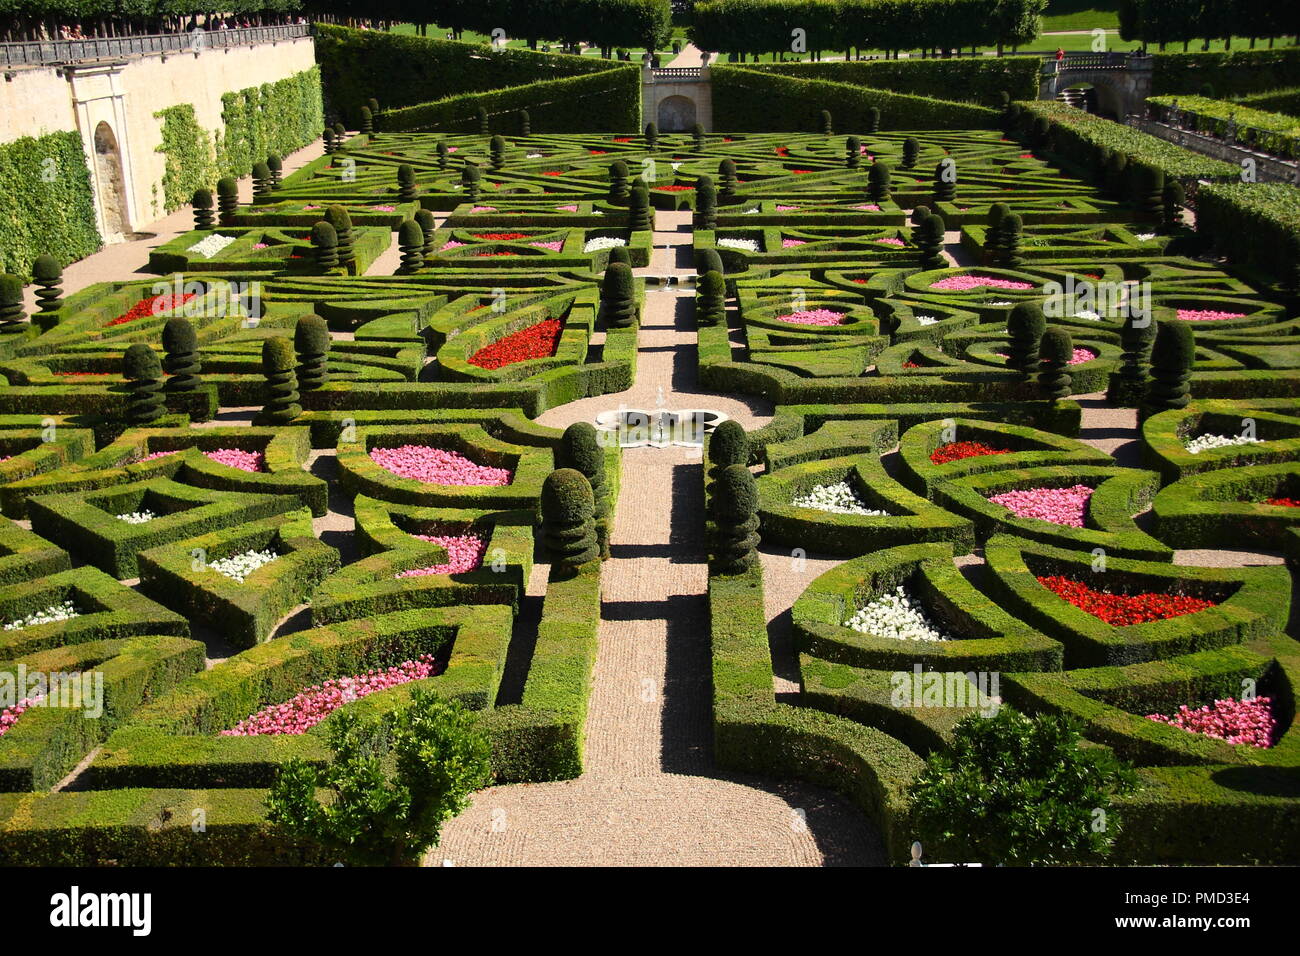 Obe of the most beautiful french gardens in "Chateau de Villandry", Loire Valley, France. Stock Photo